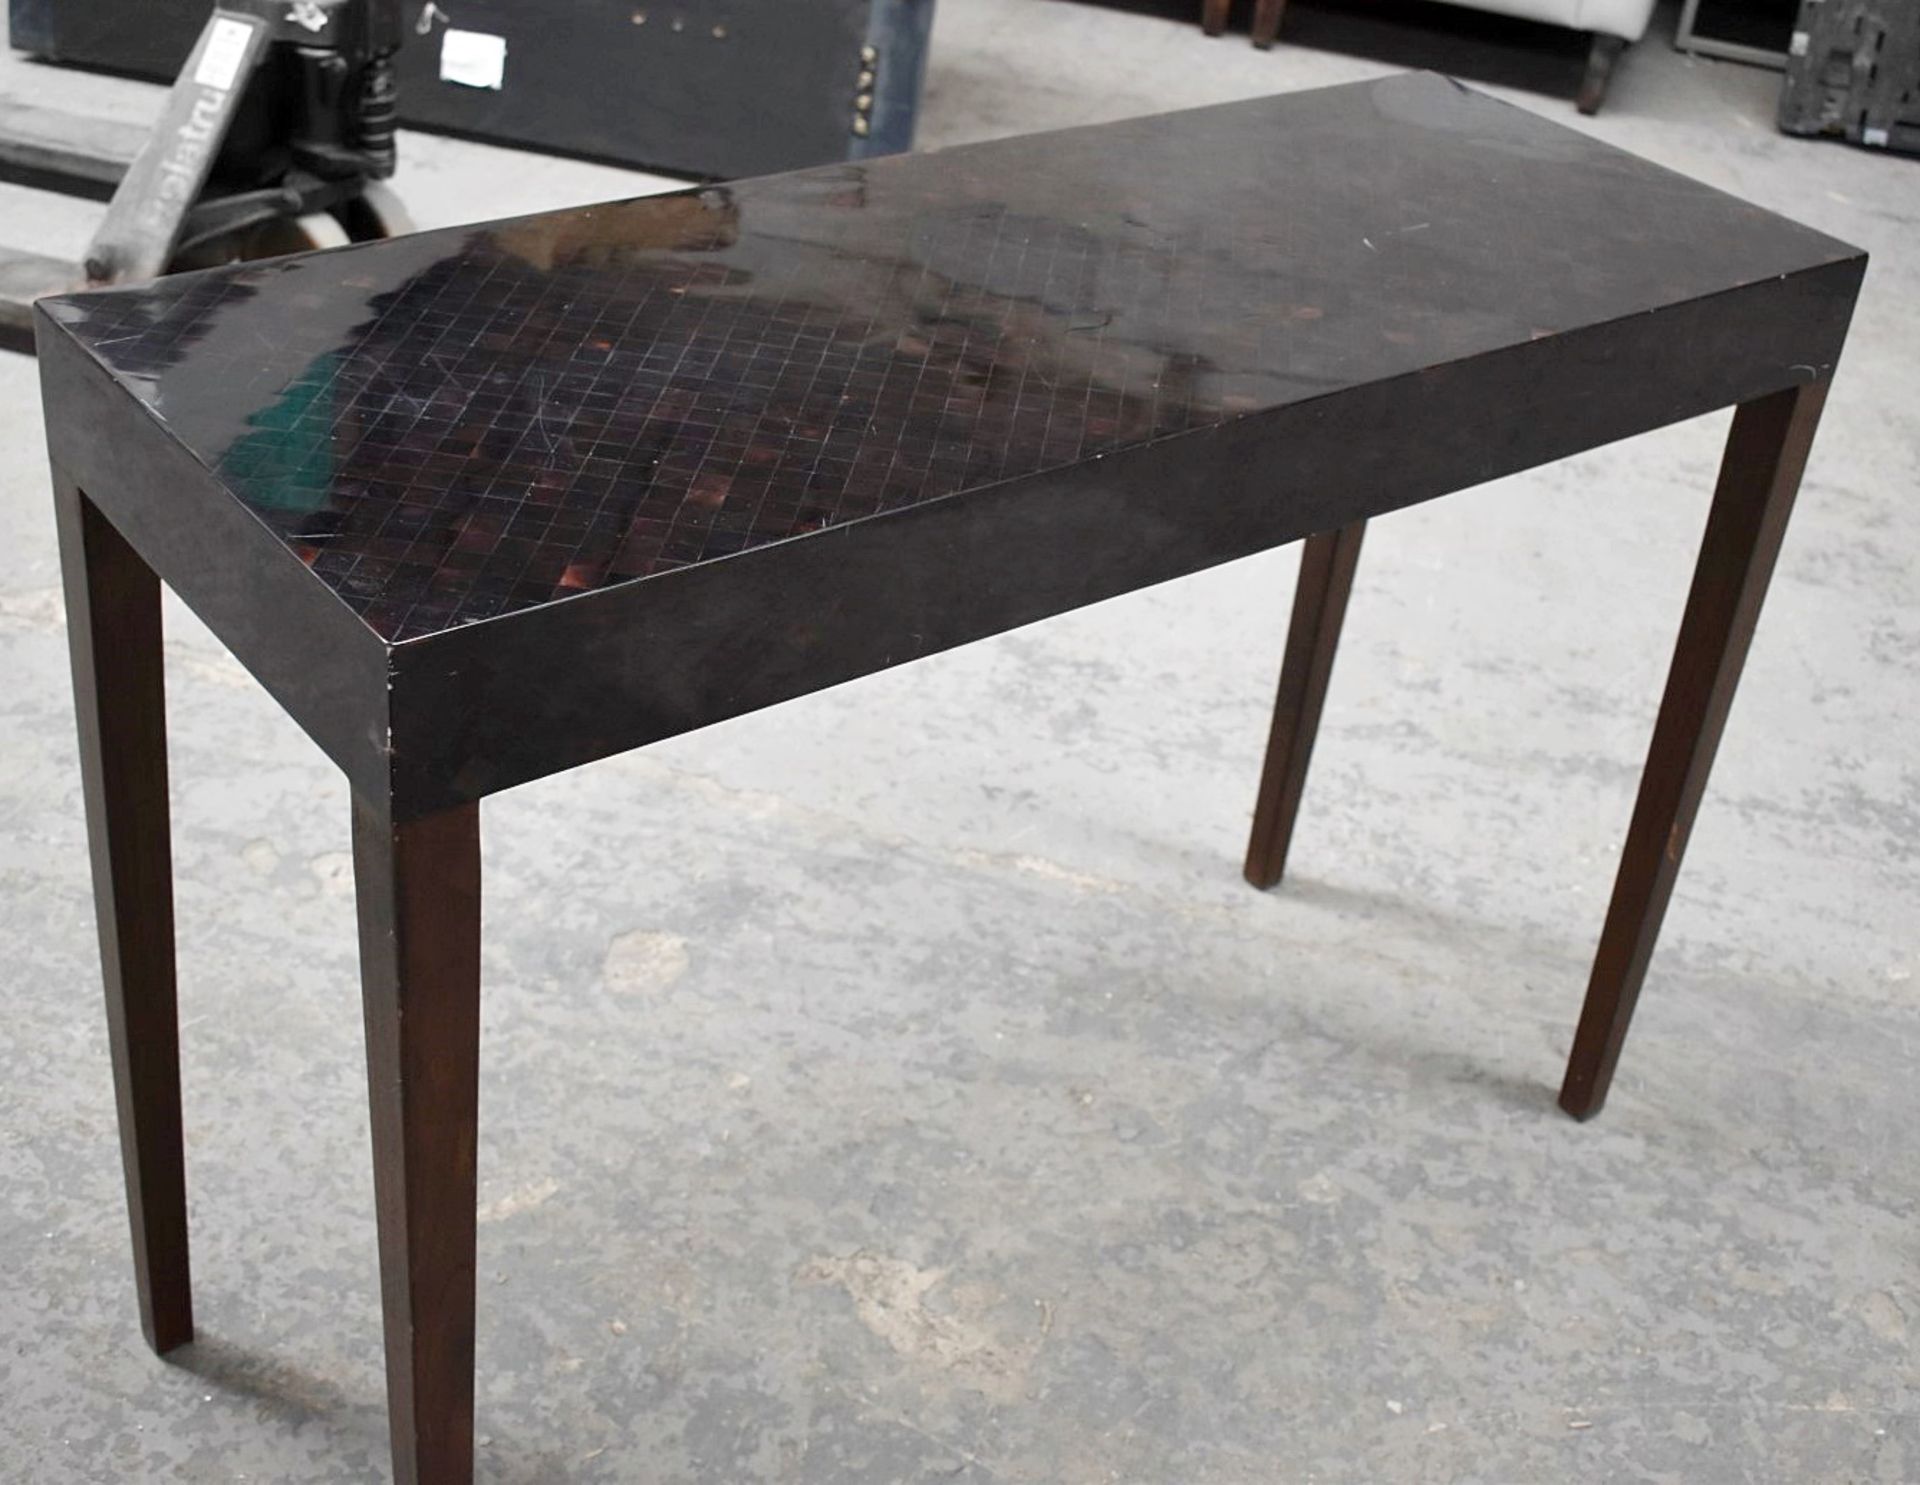 1 x Opulent Artisan Console Table With An Aubergine Hued Parquetry Laquered Top With Wenge Legs - NO - Image 4 of 6